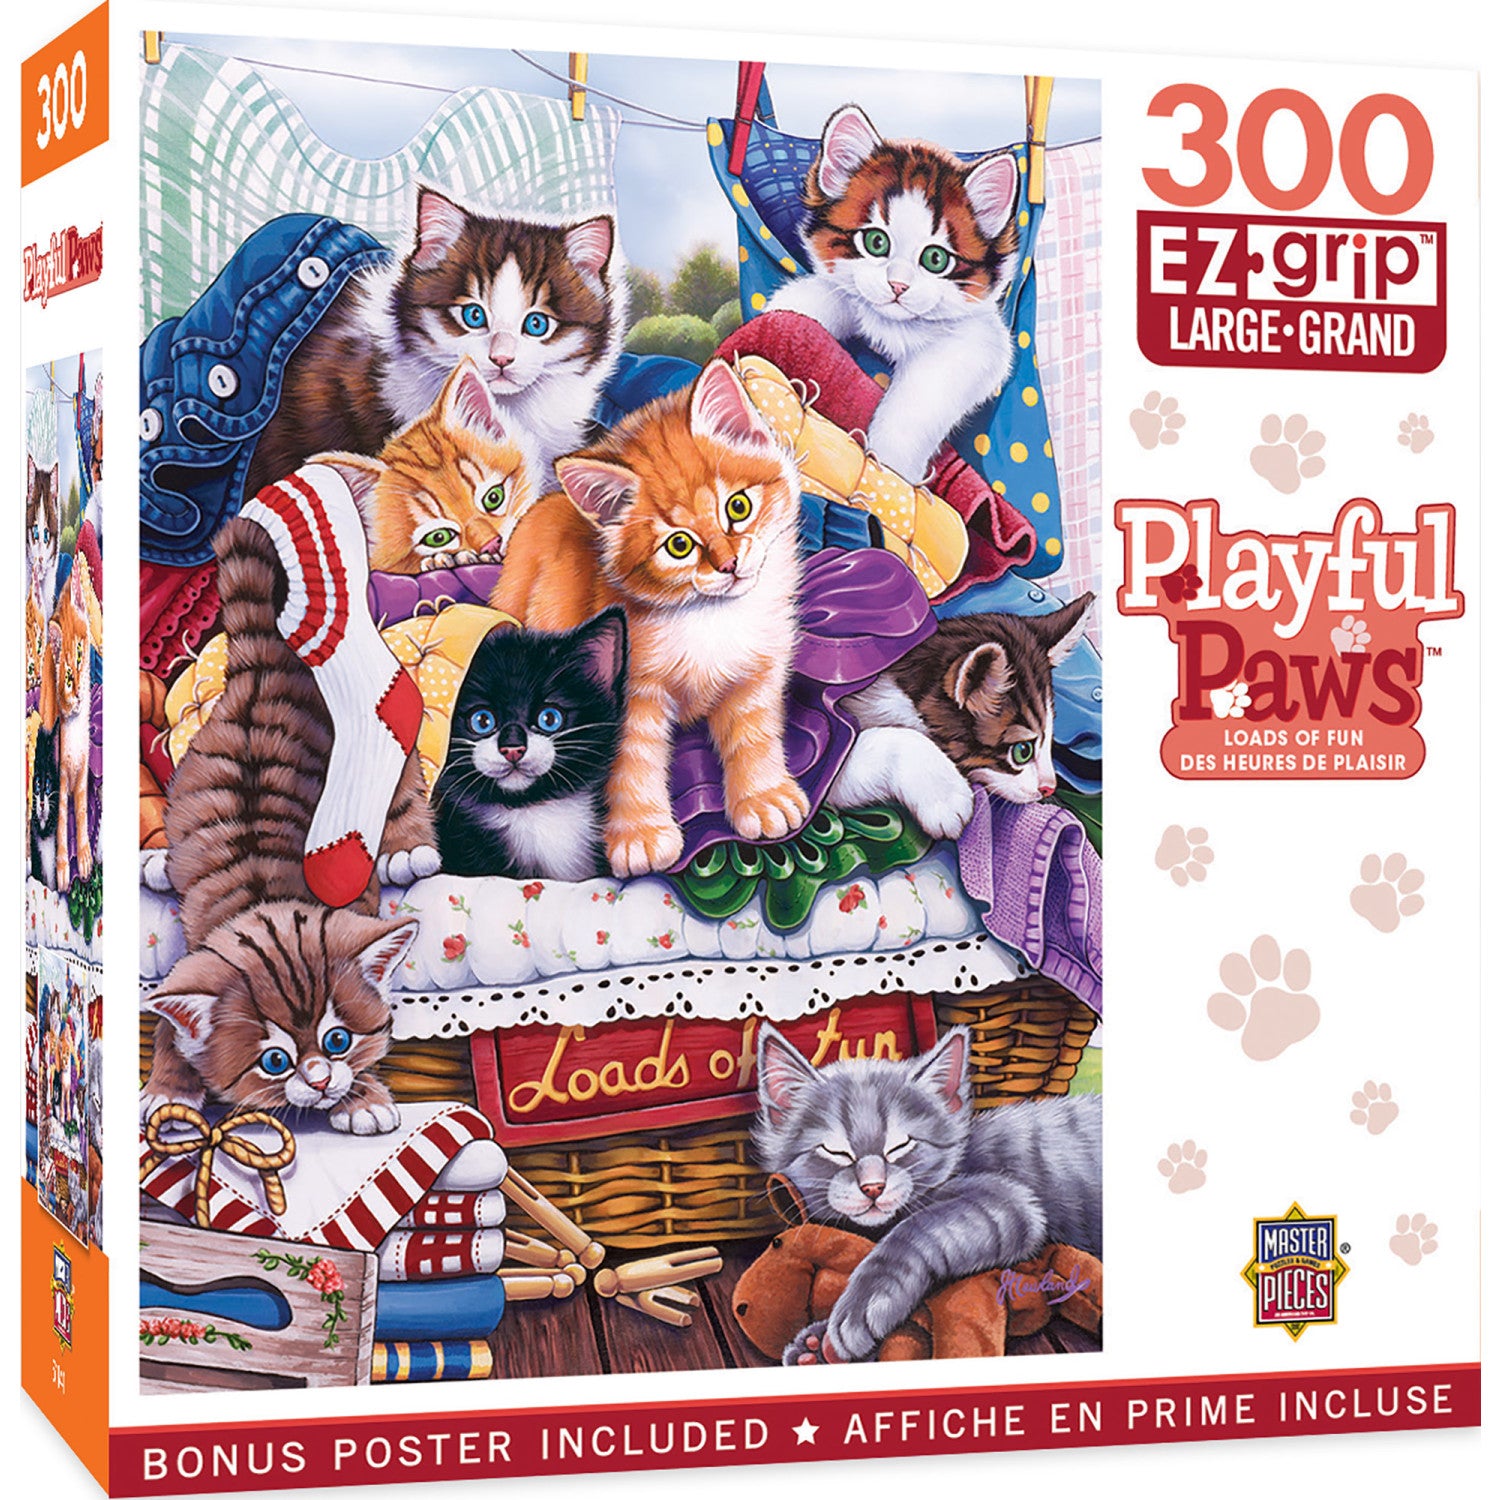 Playful Paws - Loads of Fun 300 Piece Puzzle